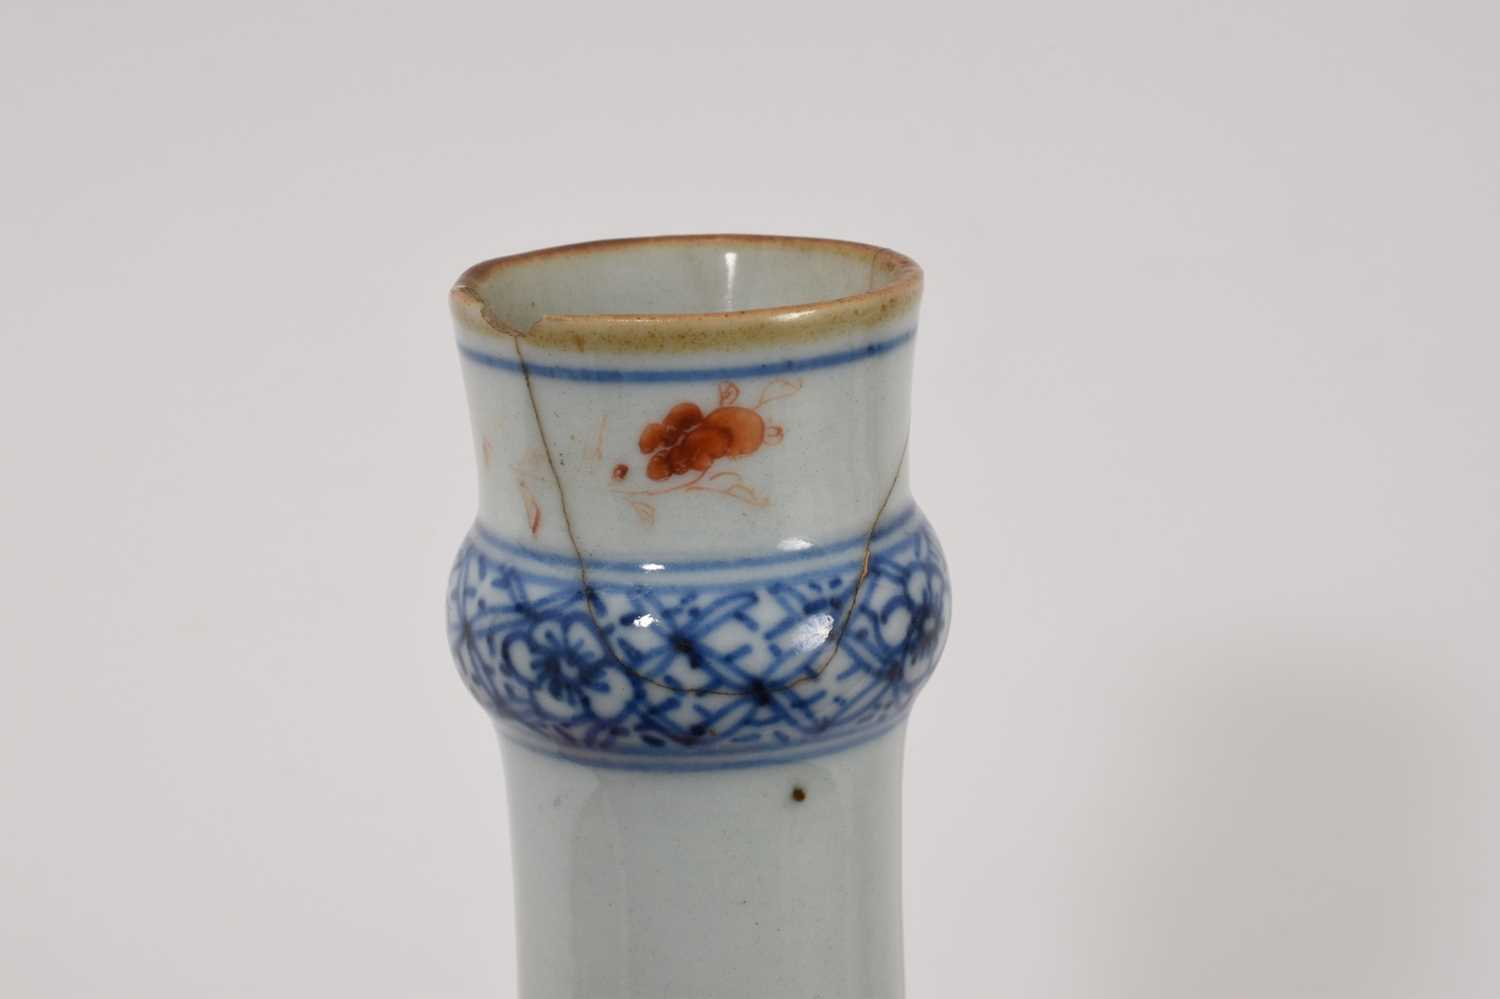 18th century Chinese porcelain guglet - Image 3 of 4